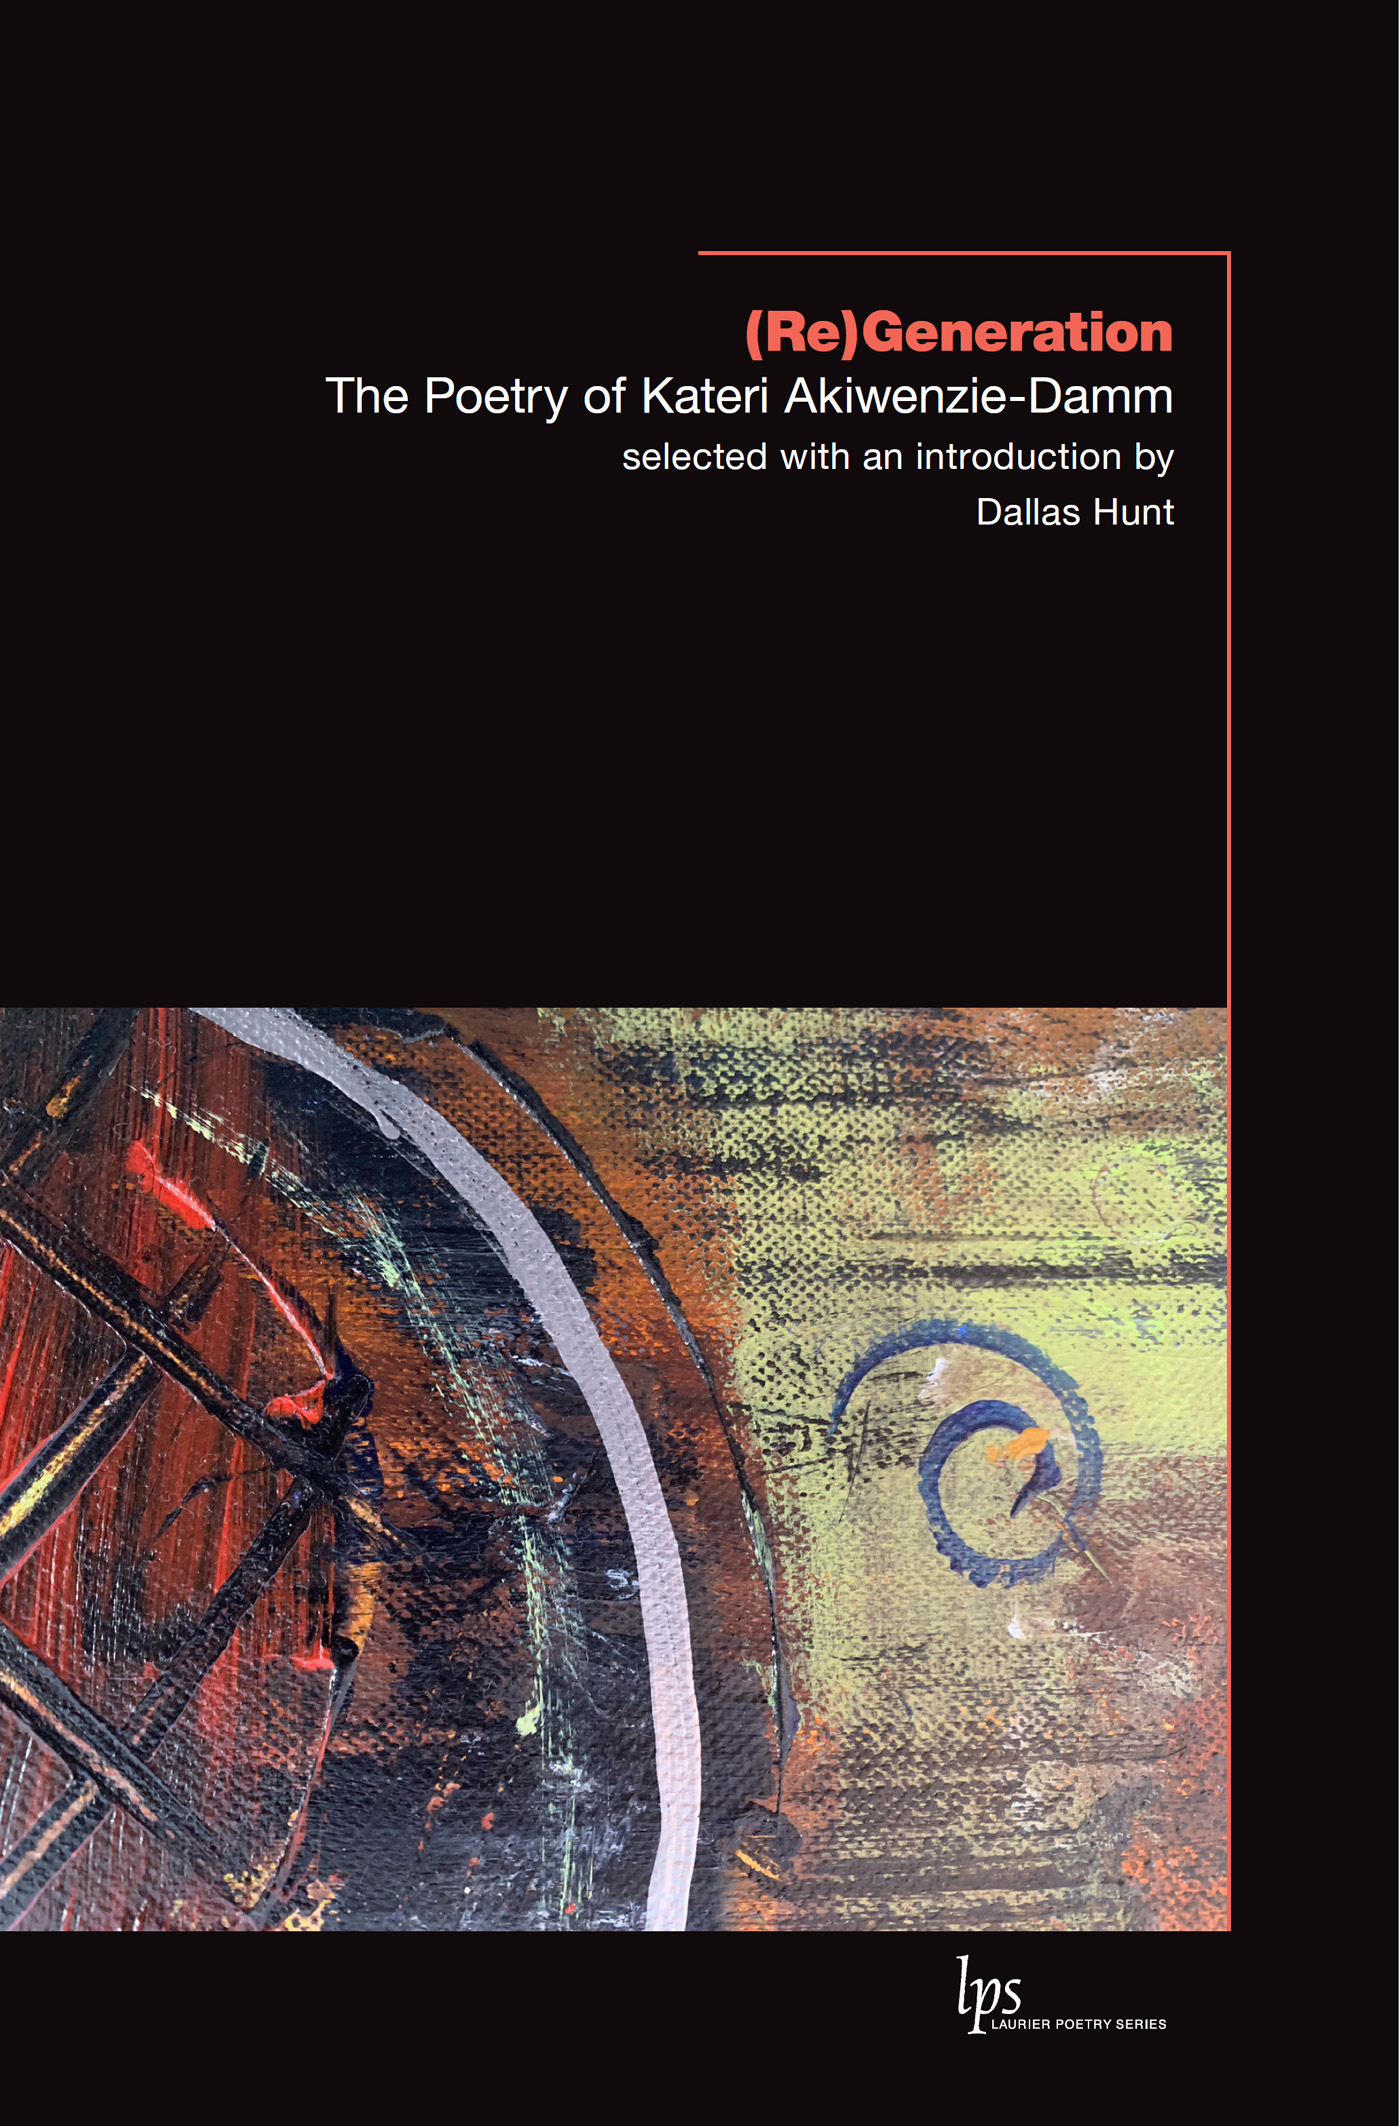 Cover page of the book titled ReGeneration The Poetry of Kateri - photo 1